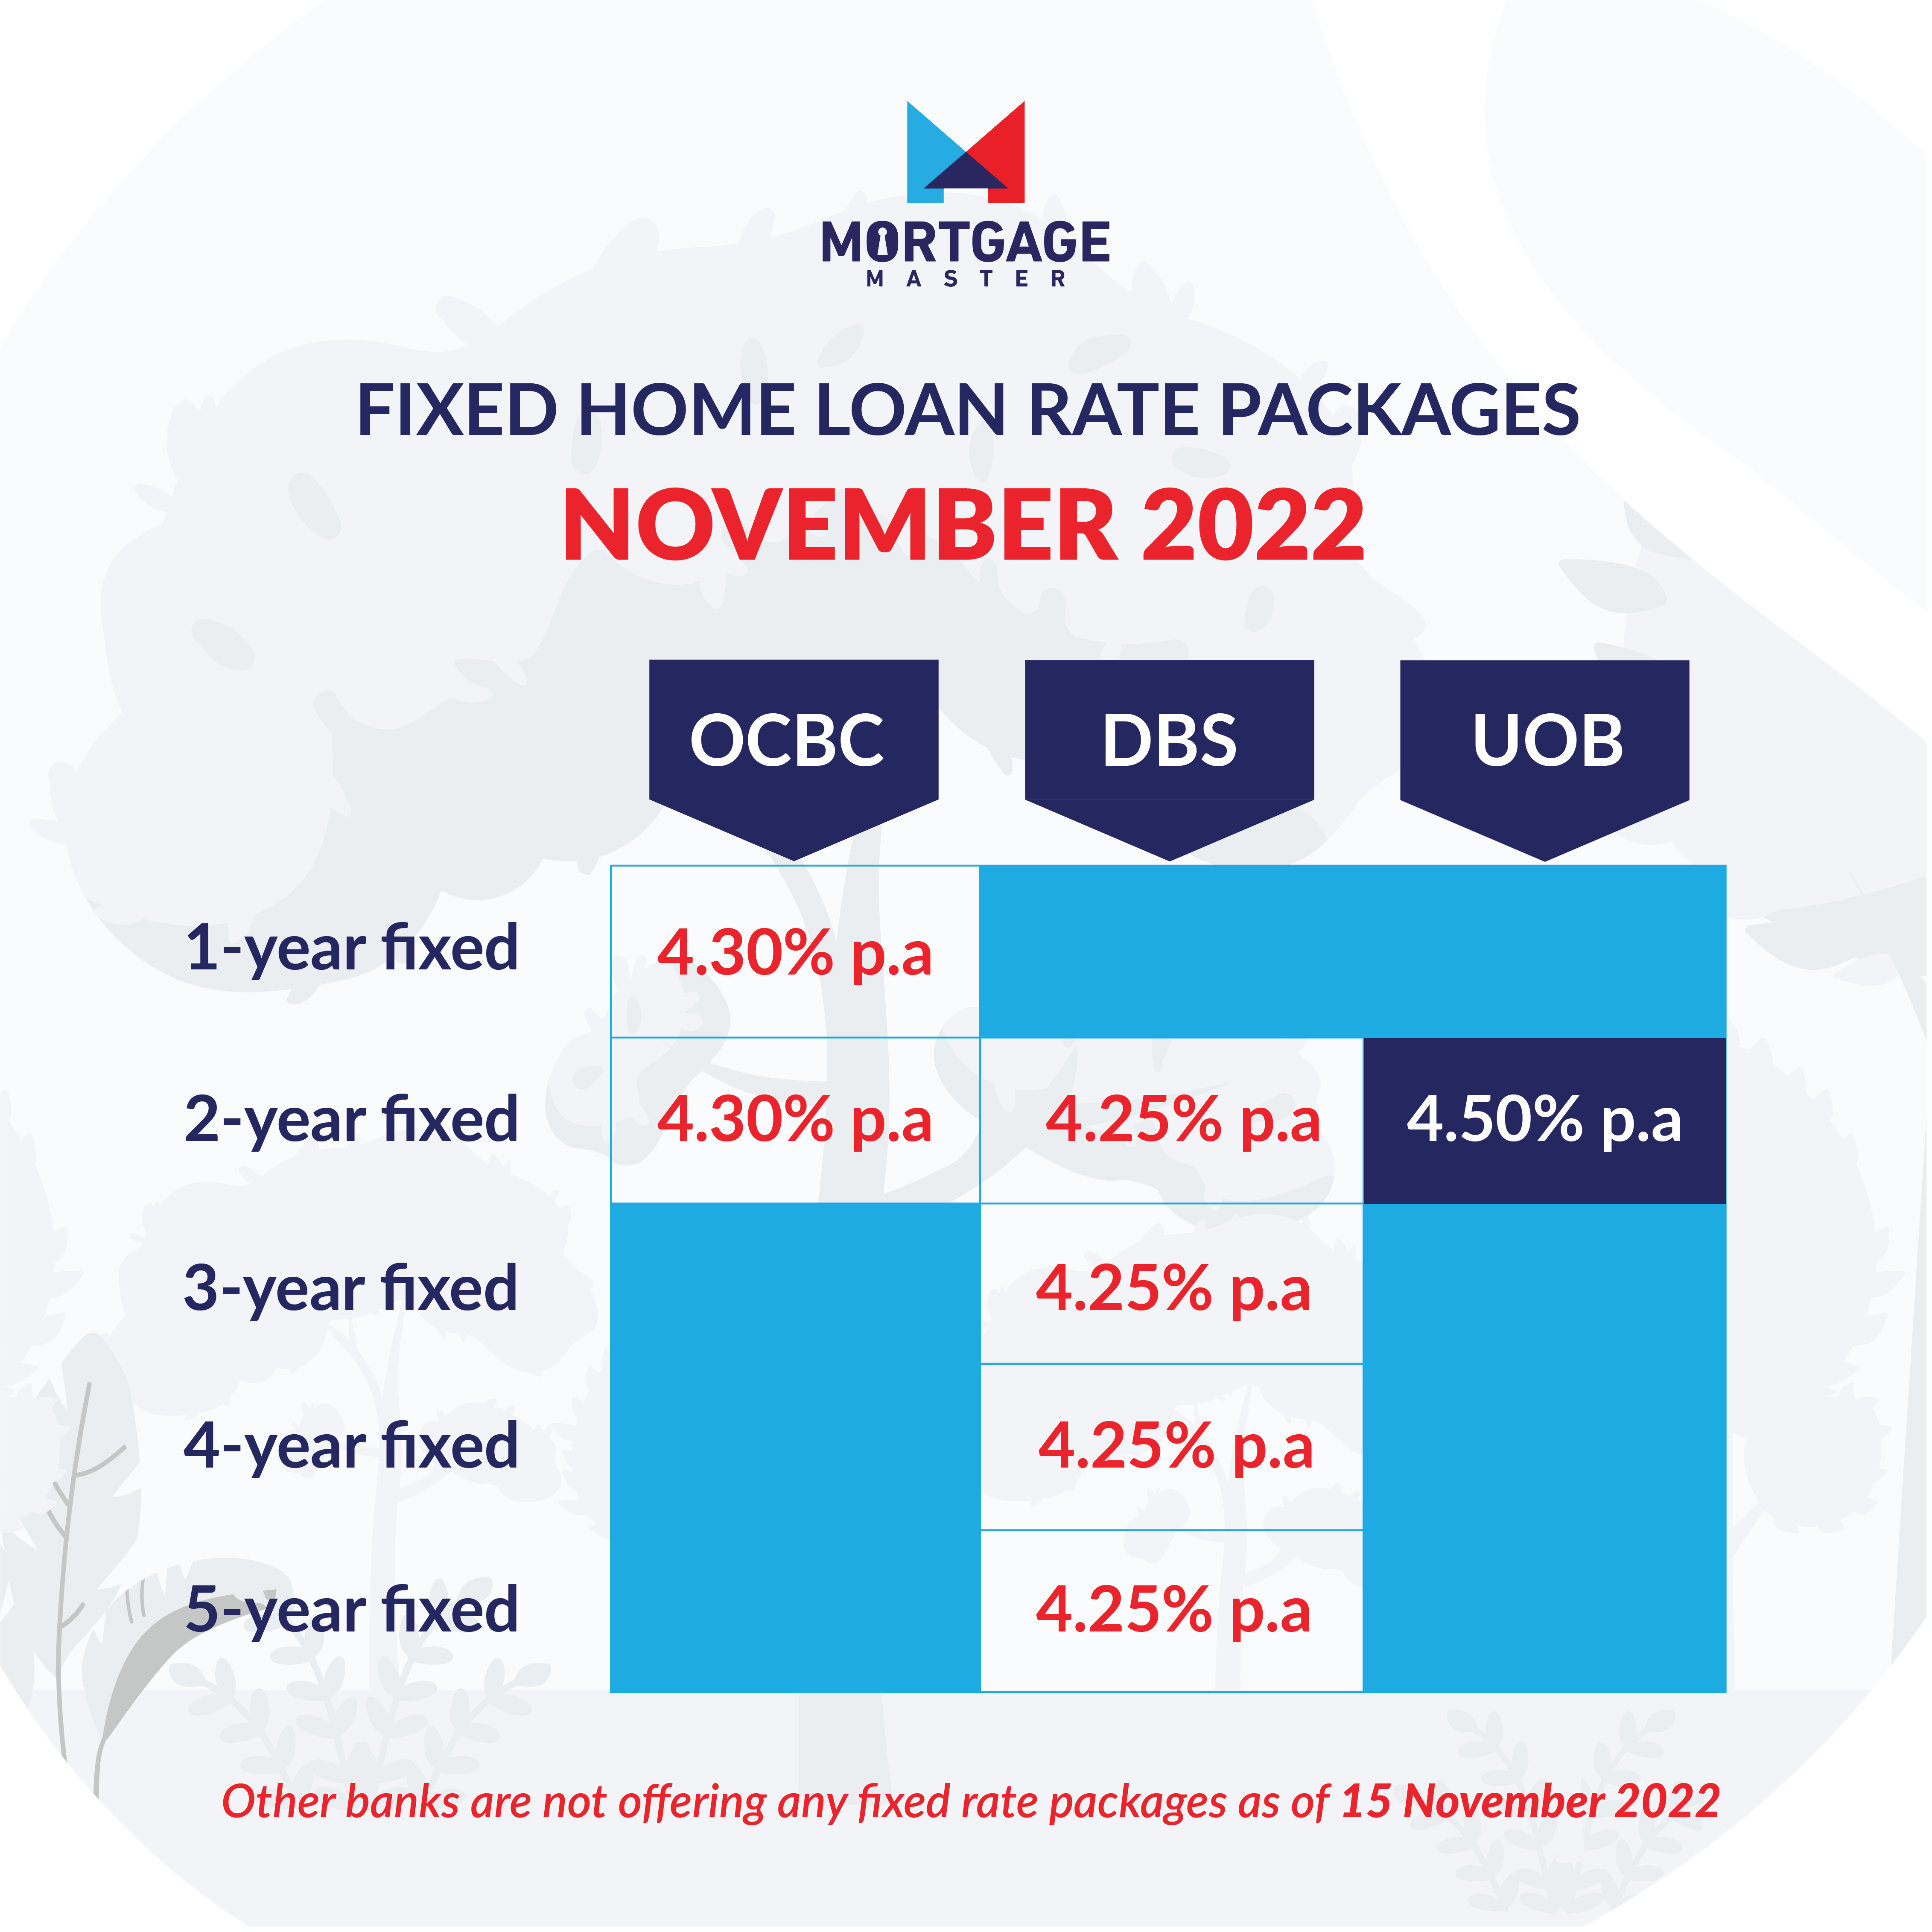 Fixed Home Loan Rate Packages as of 16 Nov 2022